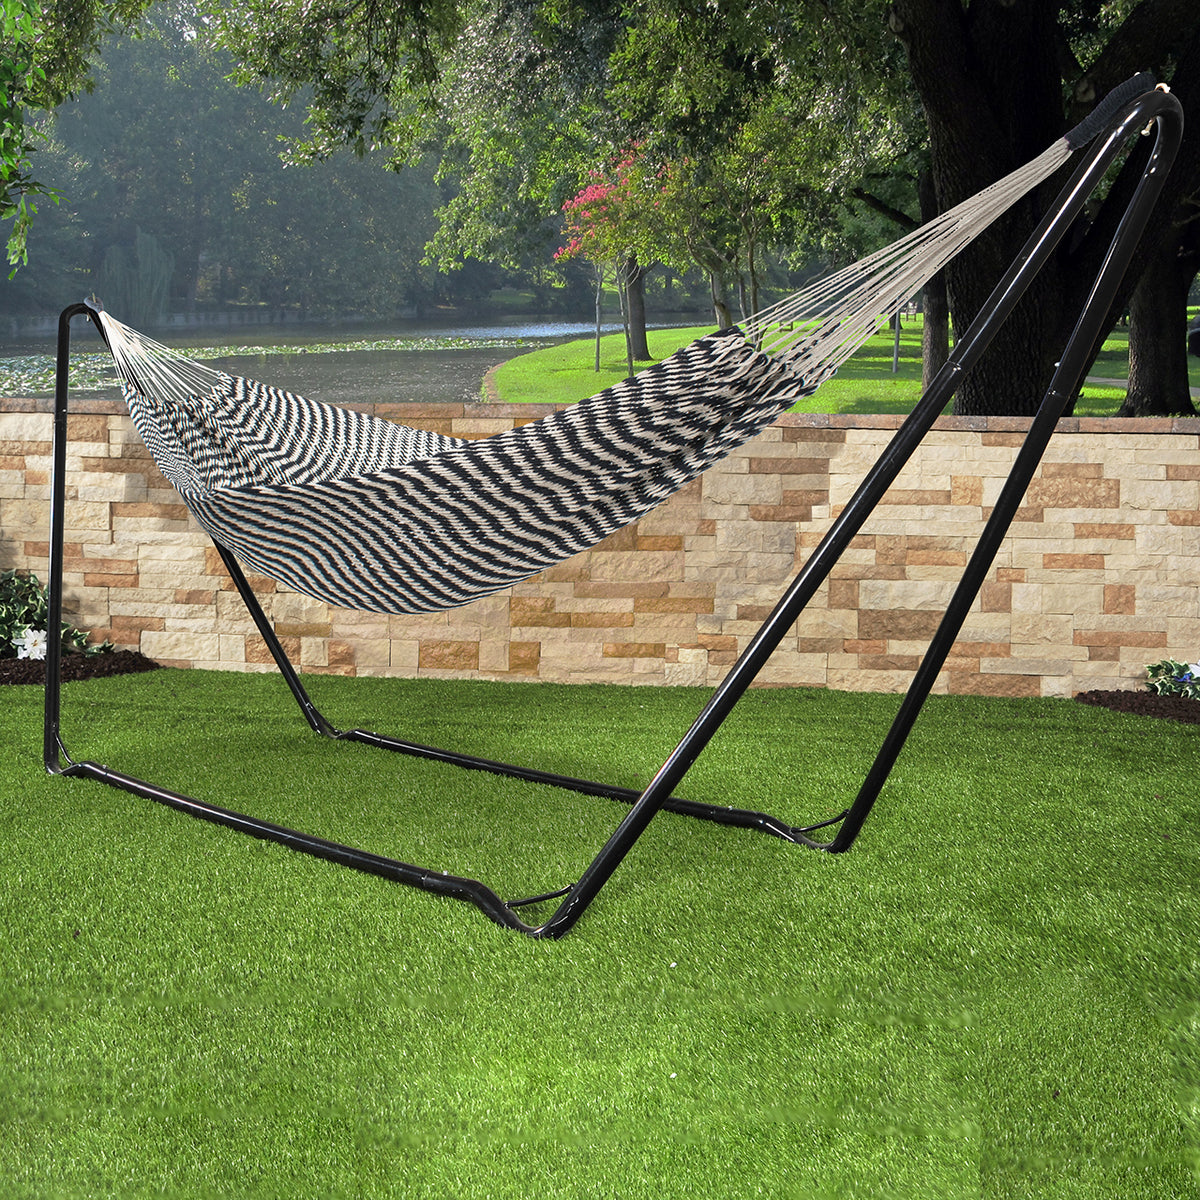 Bliss Hammocks 39-inch Brazilian Style Rope Hammock with Braided Rope Ends with a zebra-like pattern attached to a Bliss Hammocks Stand outside in the grass.